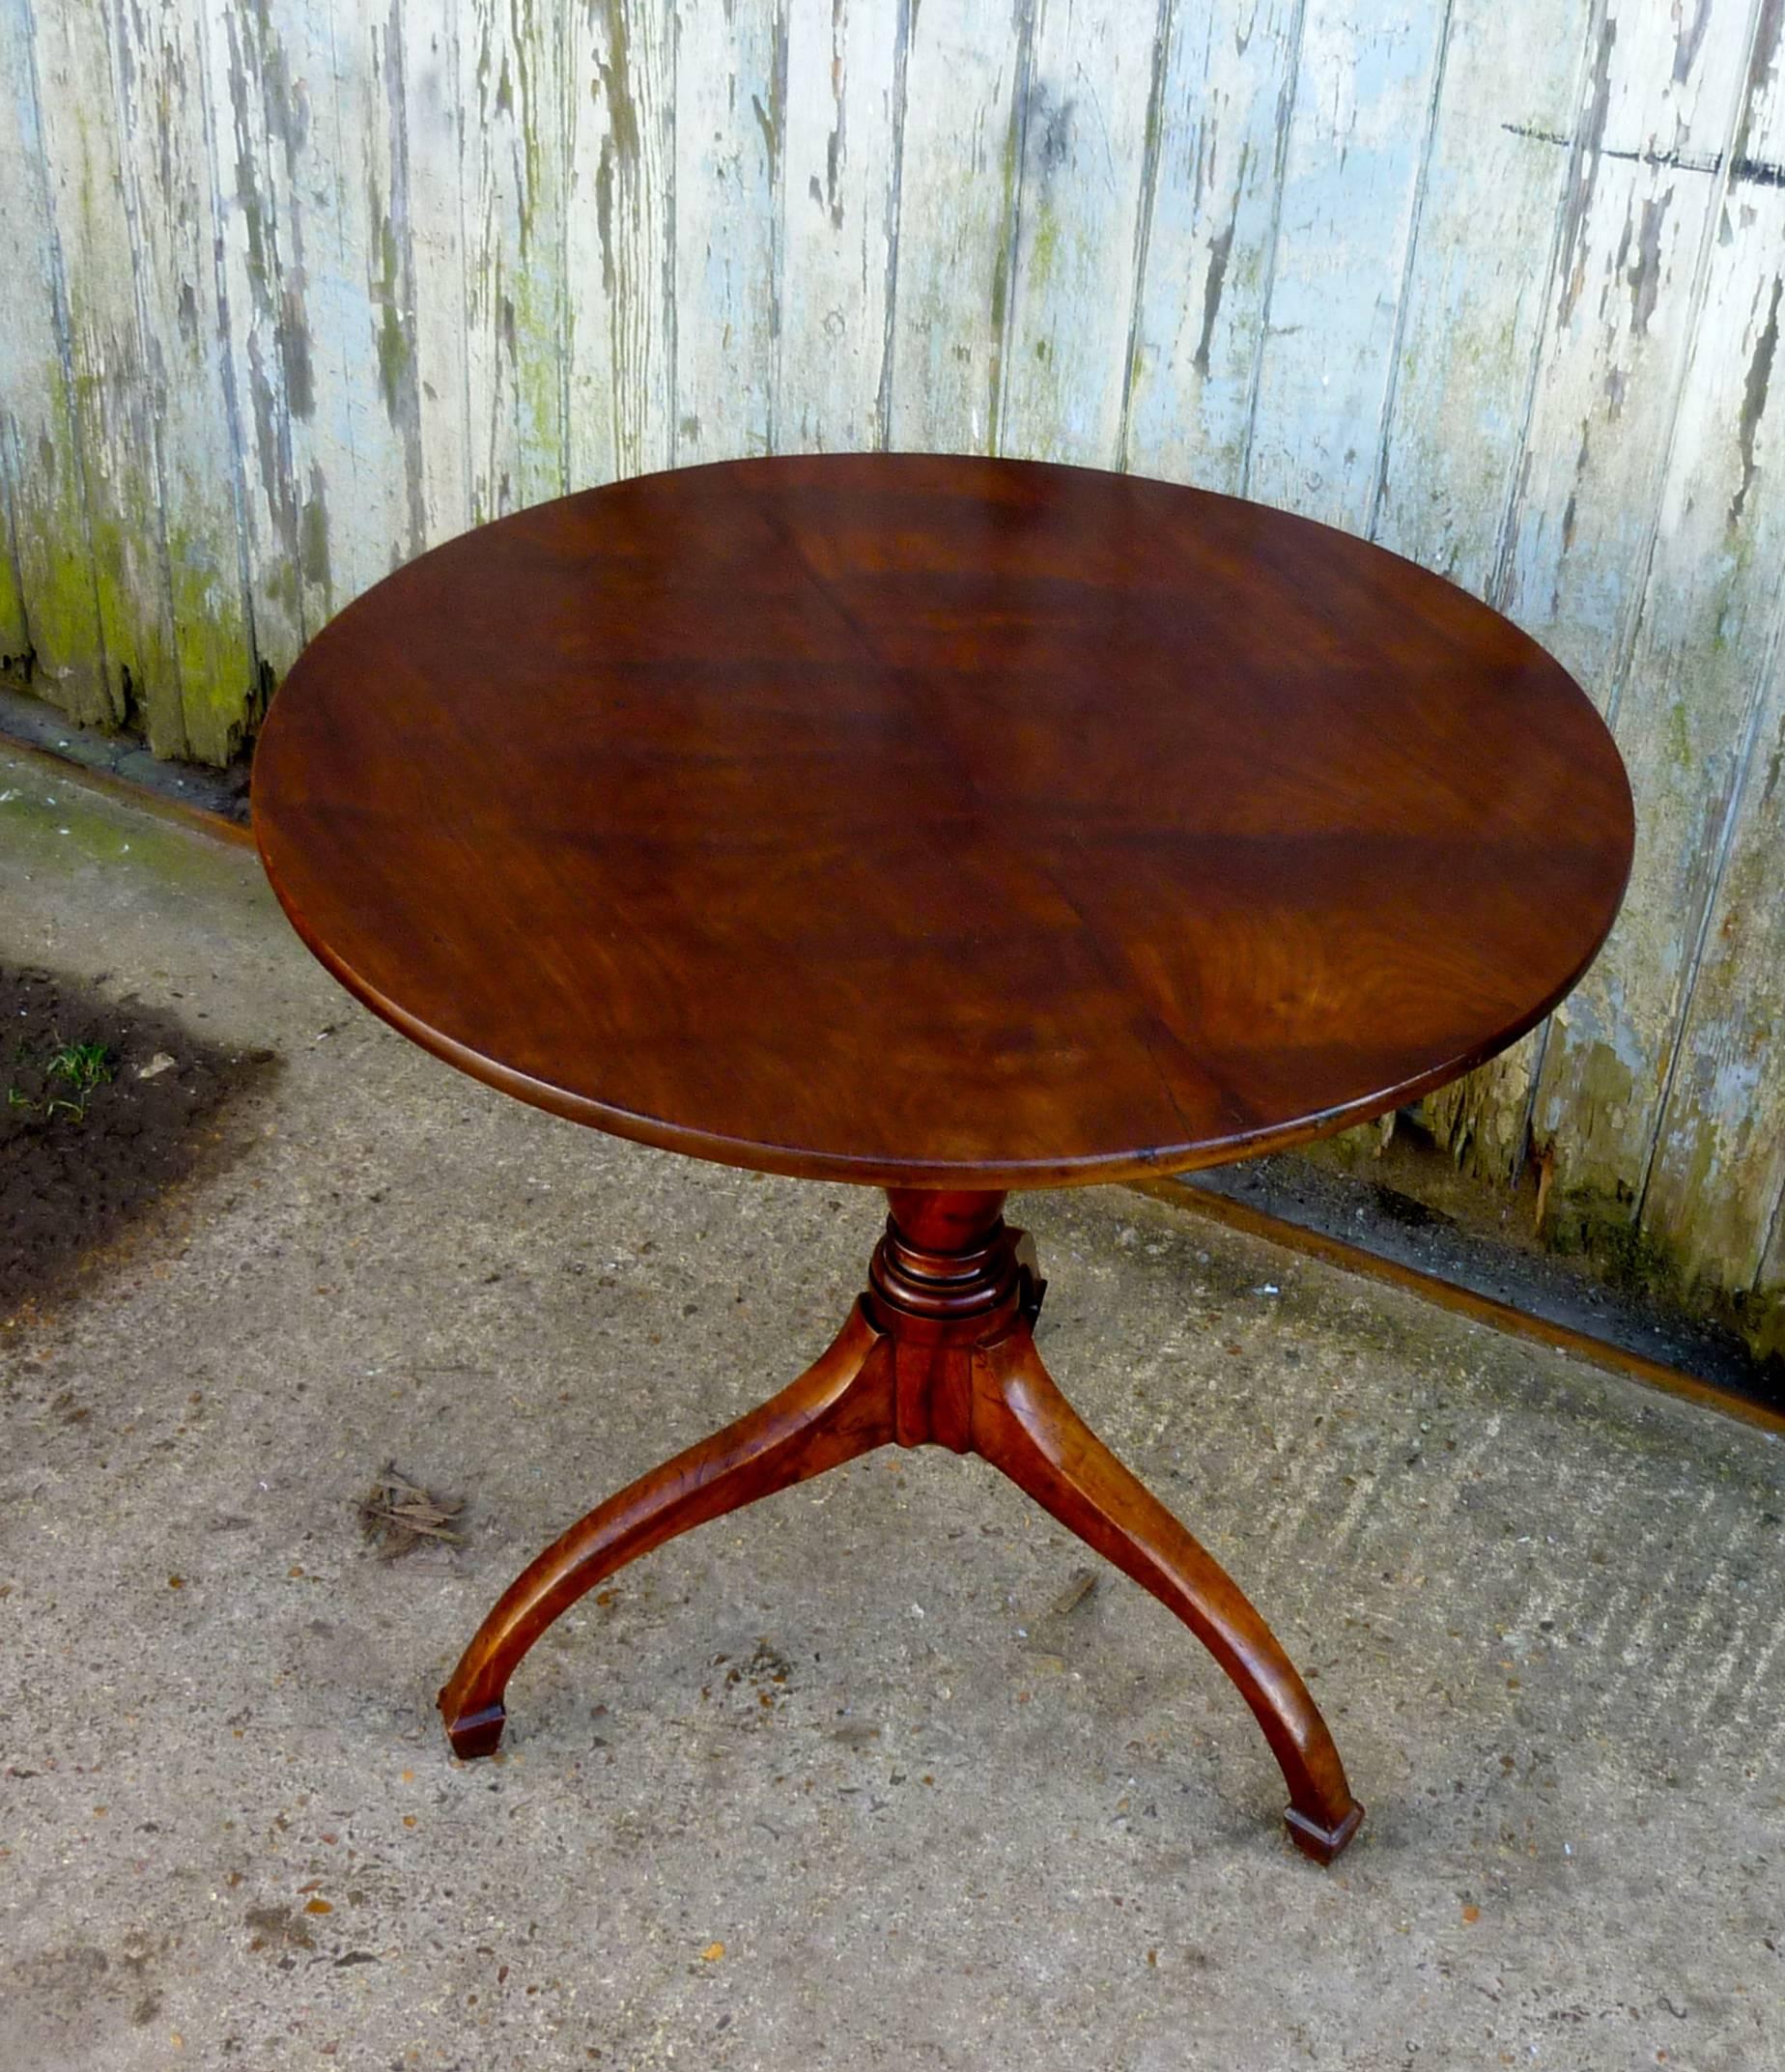 Georgian yew wood tilt-top table

This lovely table it stands on a three footed base and has an elegant shaped centre leg
The superbly figured yew top tilts easily, on the cherry leg and is held in place by a small catch below
The table is in